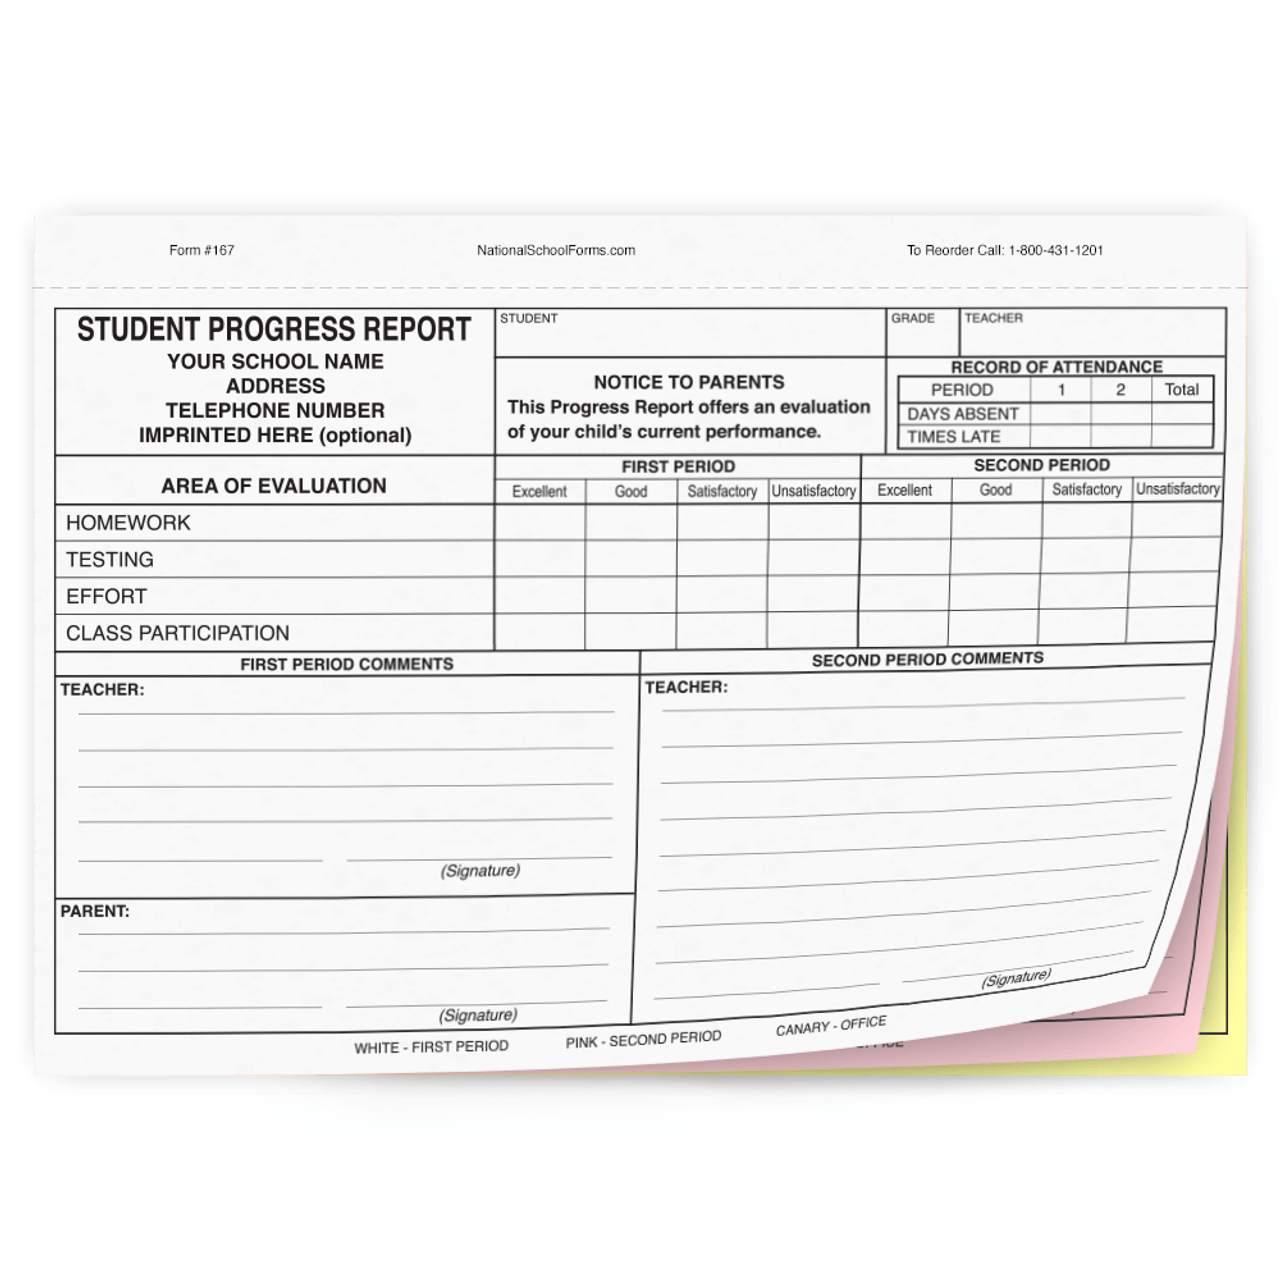 Student Progress Report with Parent Comment Section (167) - 3 part carbonless form
with optional Imprint